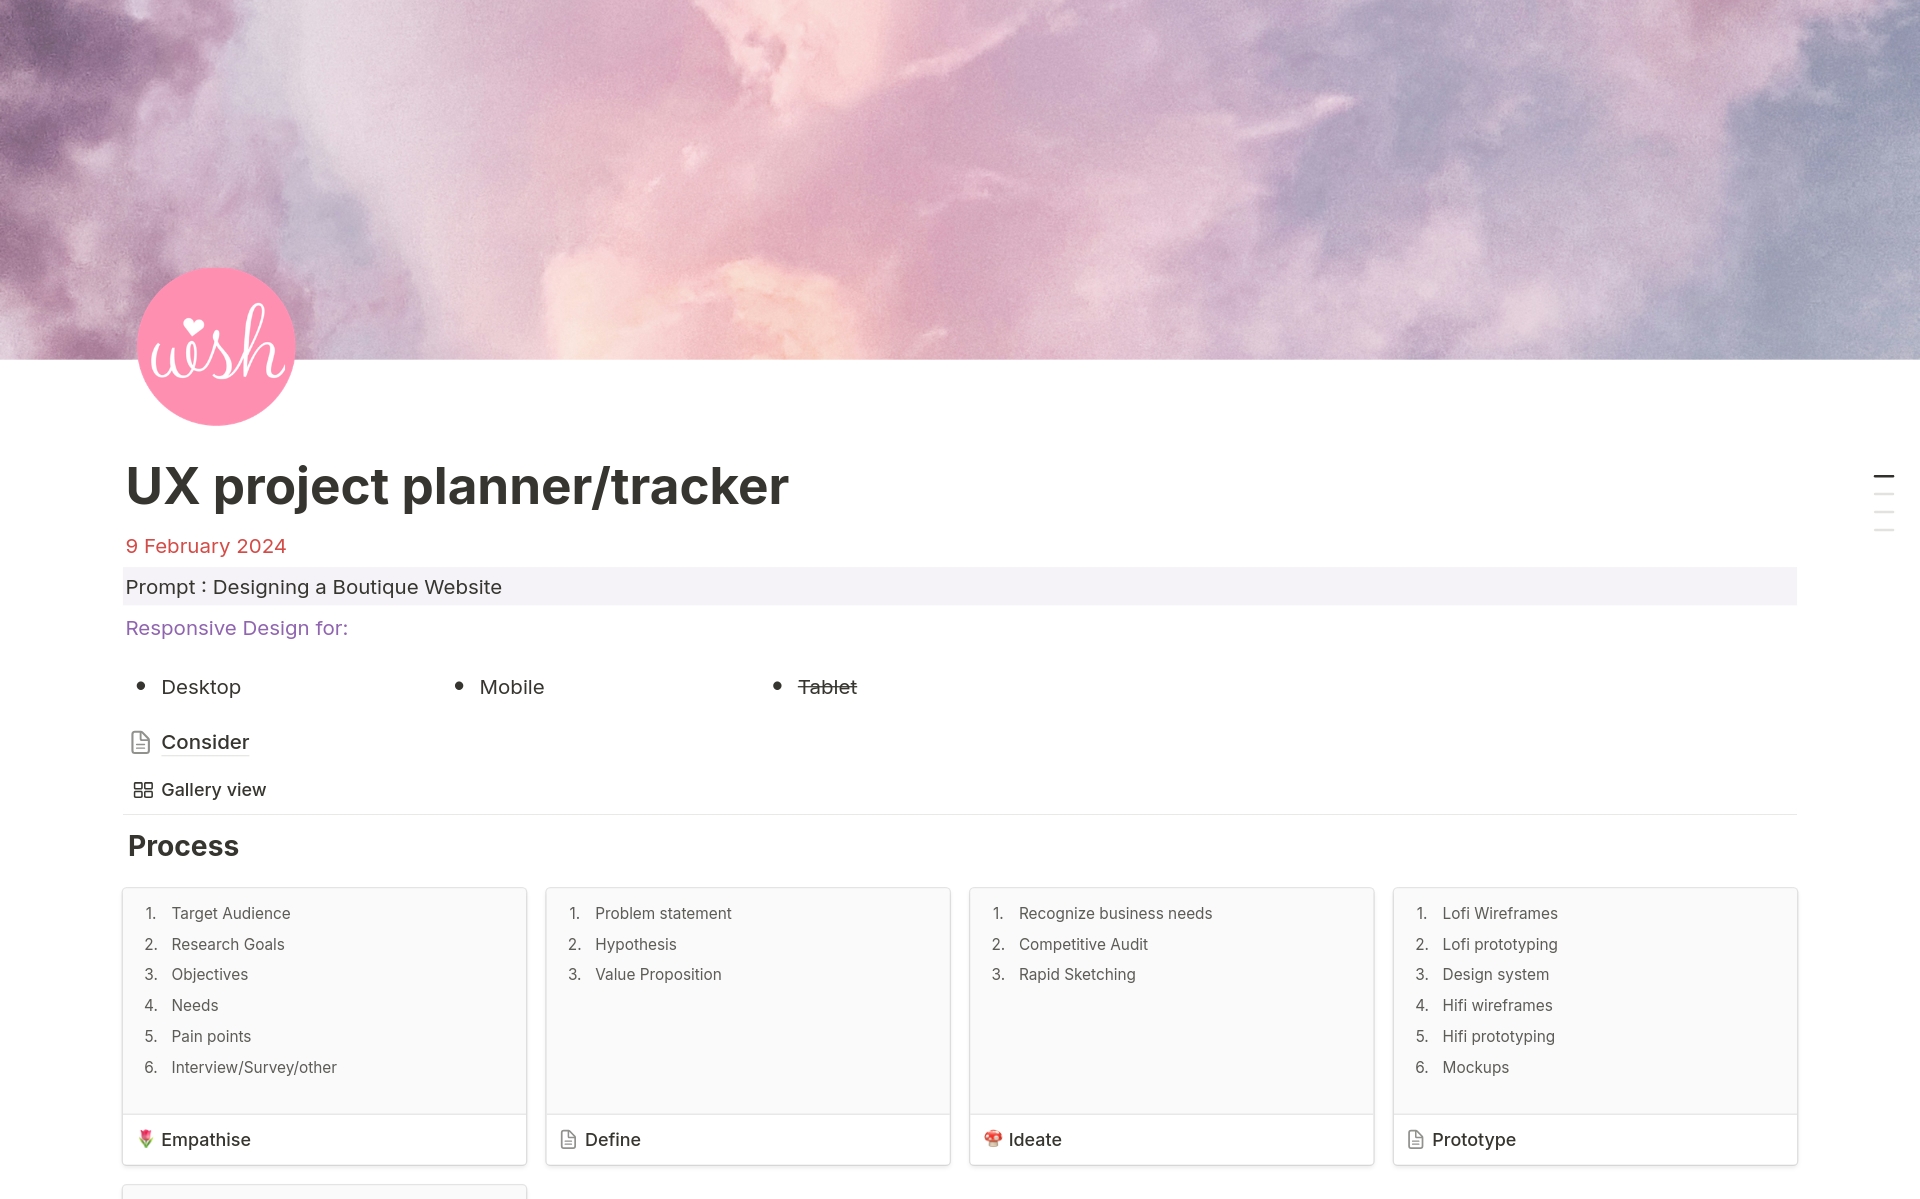 Simple & to the point UX project planner / tracker. So that at the end of project you have everything you need at one place for creatingyour case study !!